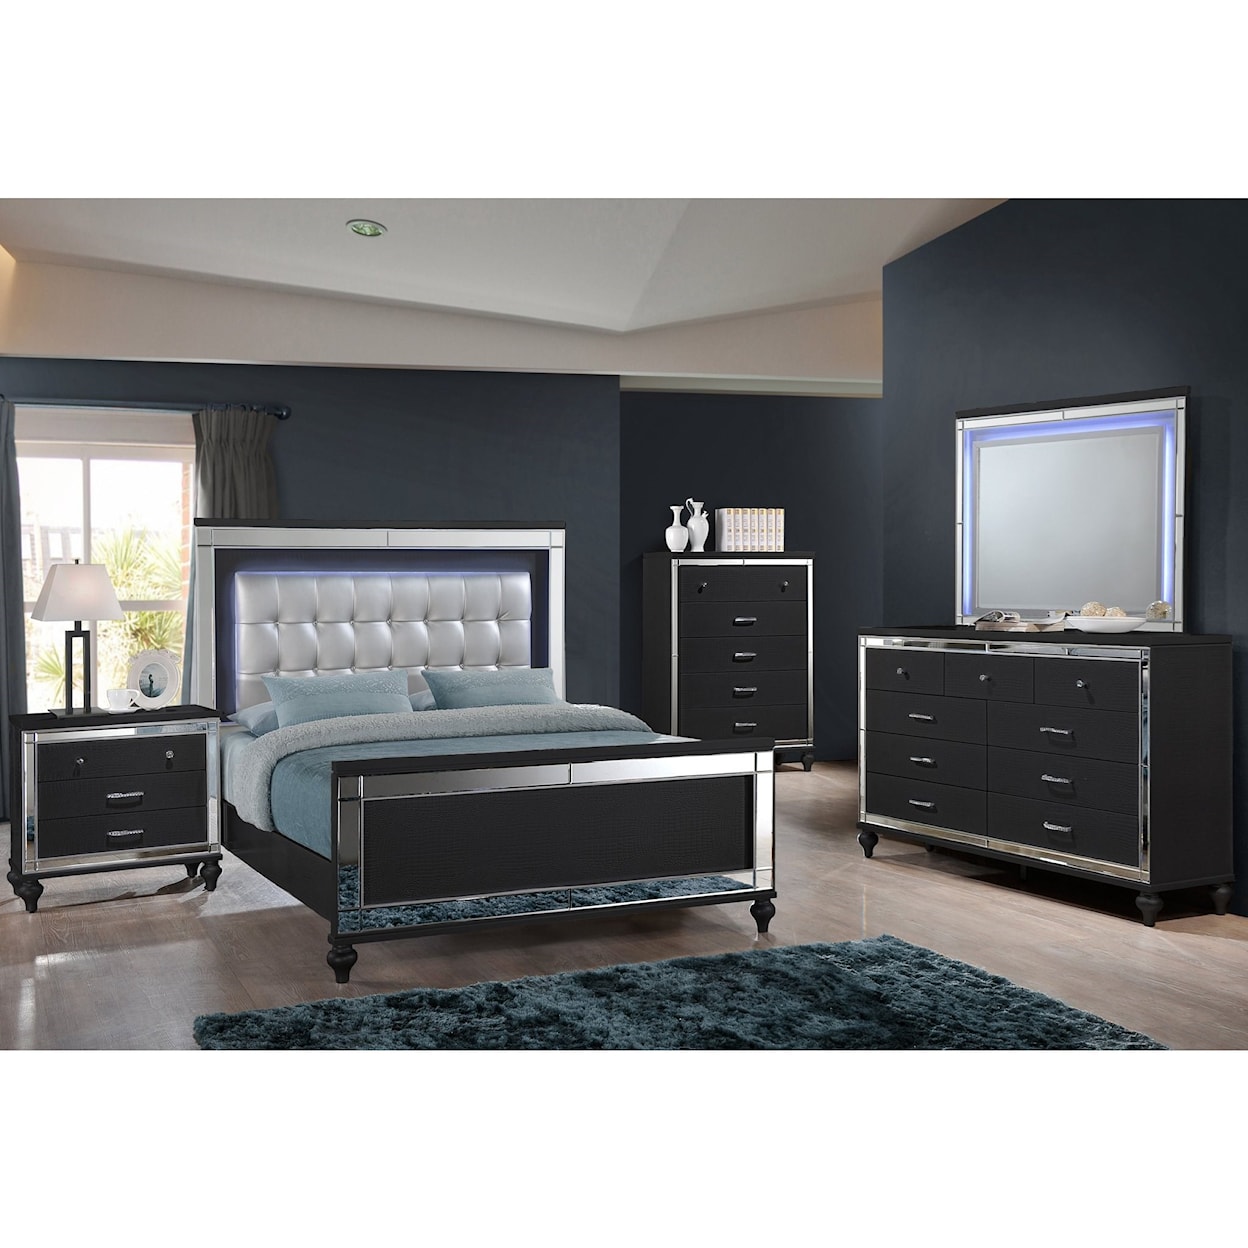 New Classic Valentino King Bedroom Group